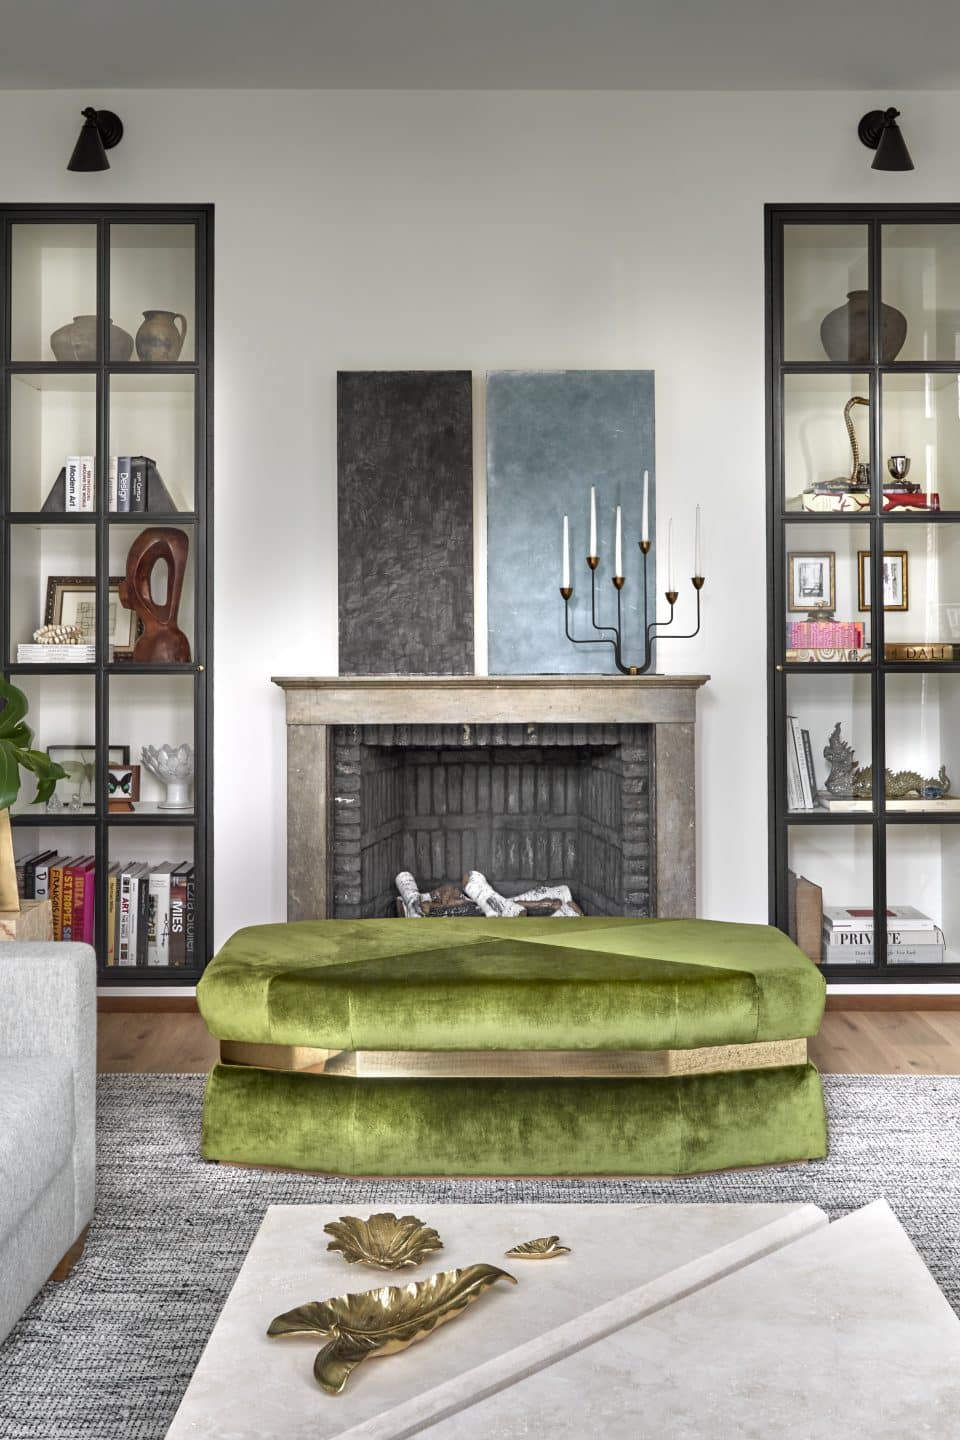 Sasha Adler Conjures a Sleek Yet Inviting Chicago Abode with Bold Colors and Iconic Designs